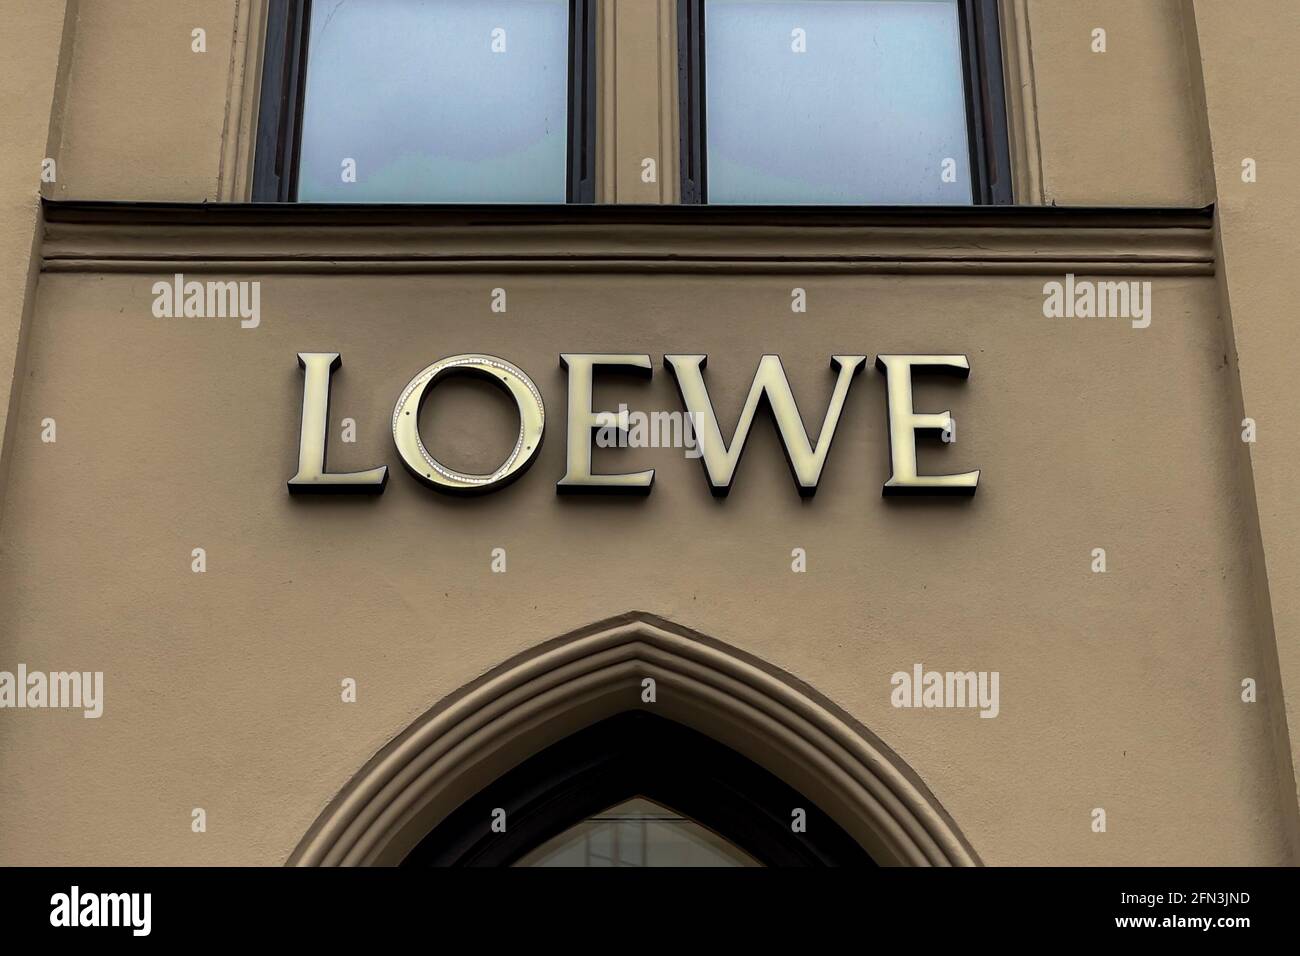 Loewe store sign in Munich town center Stock Photo